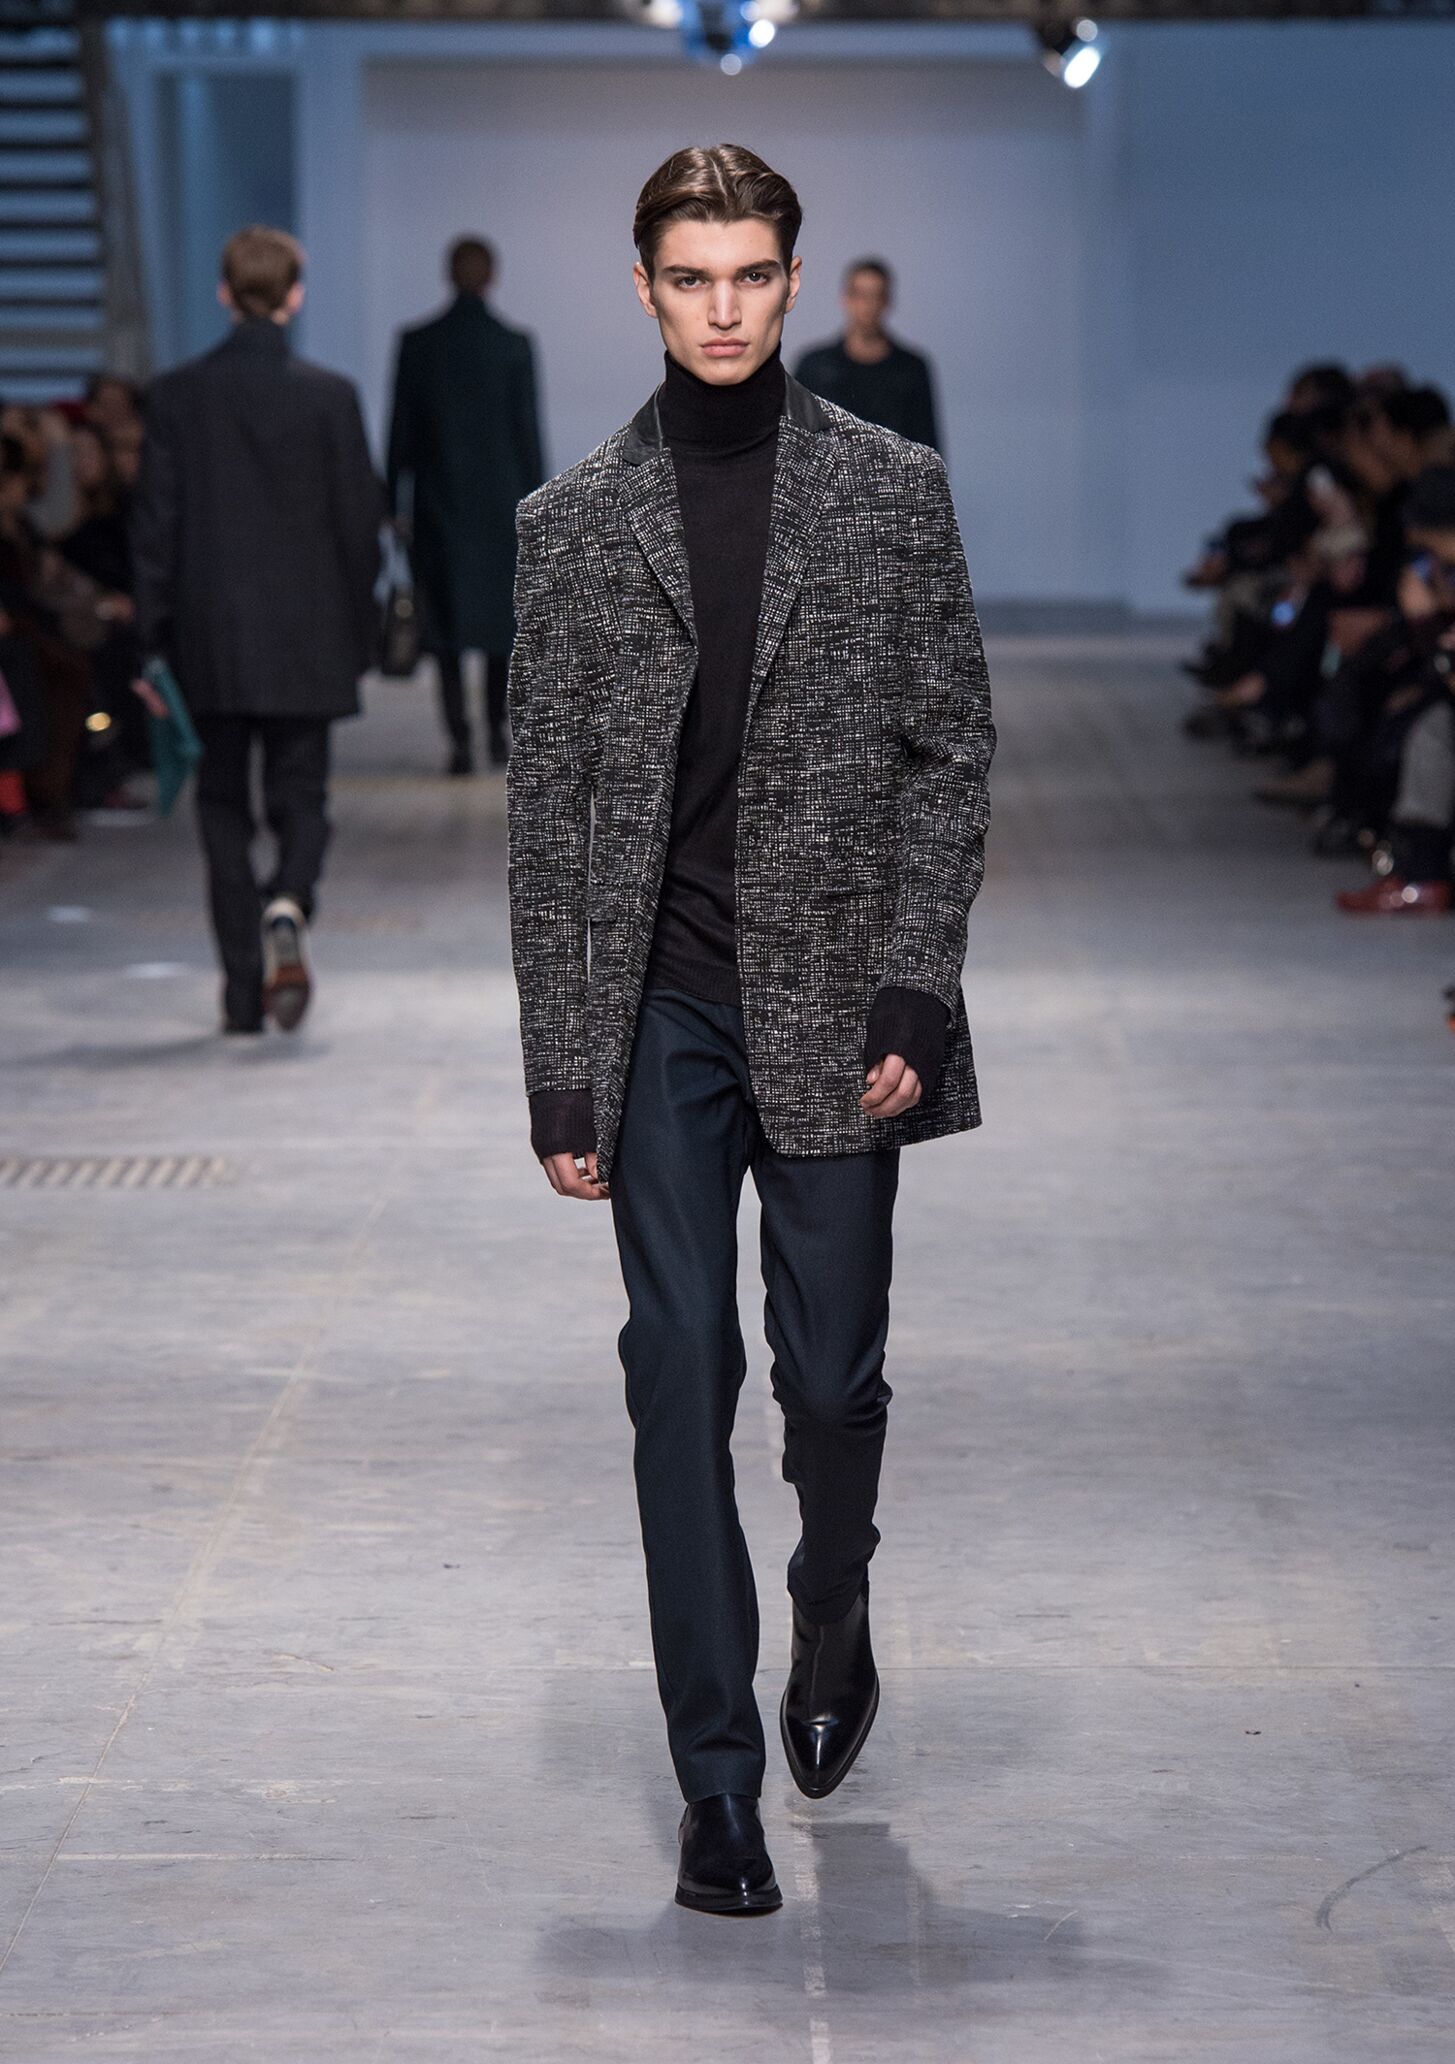 COSTUME NATIONAL HOMME FALL WINTER 2014 - MILANO FASHION WEEK | The Skinny Beep1455 x 2064